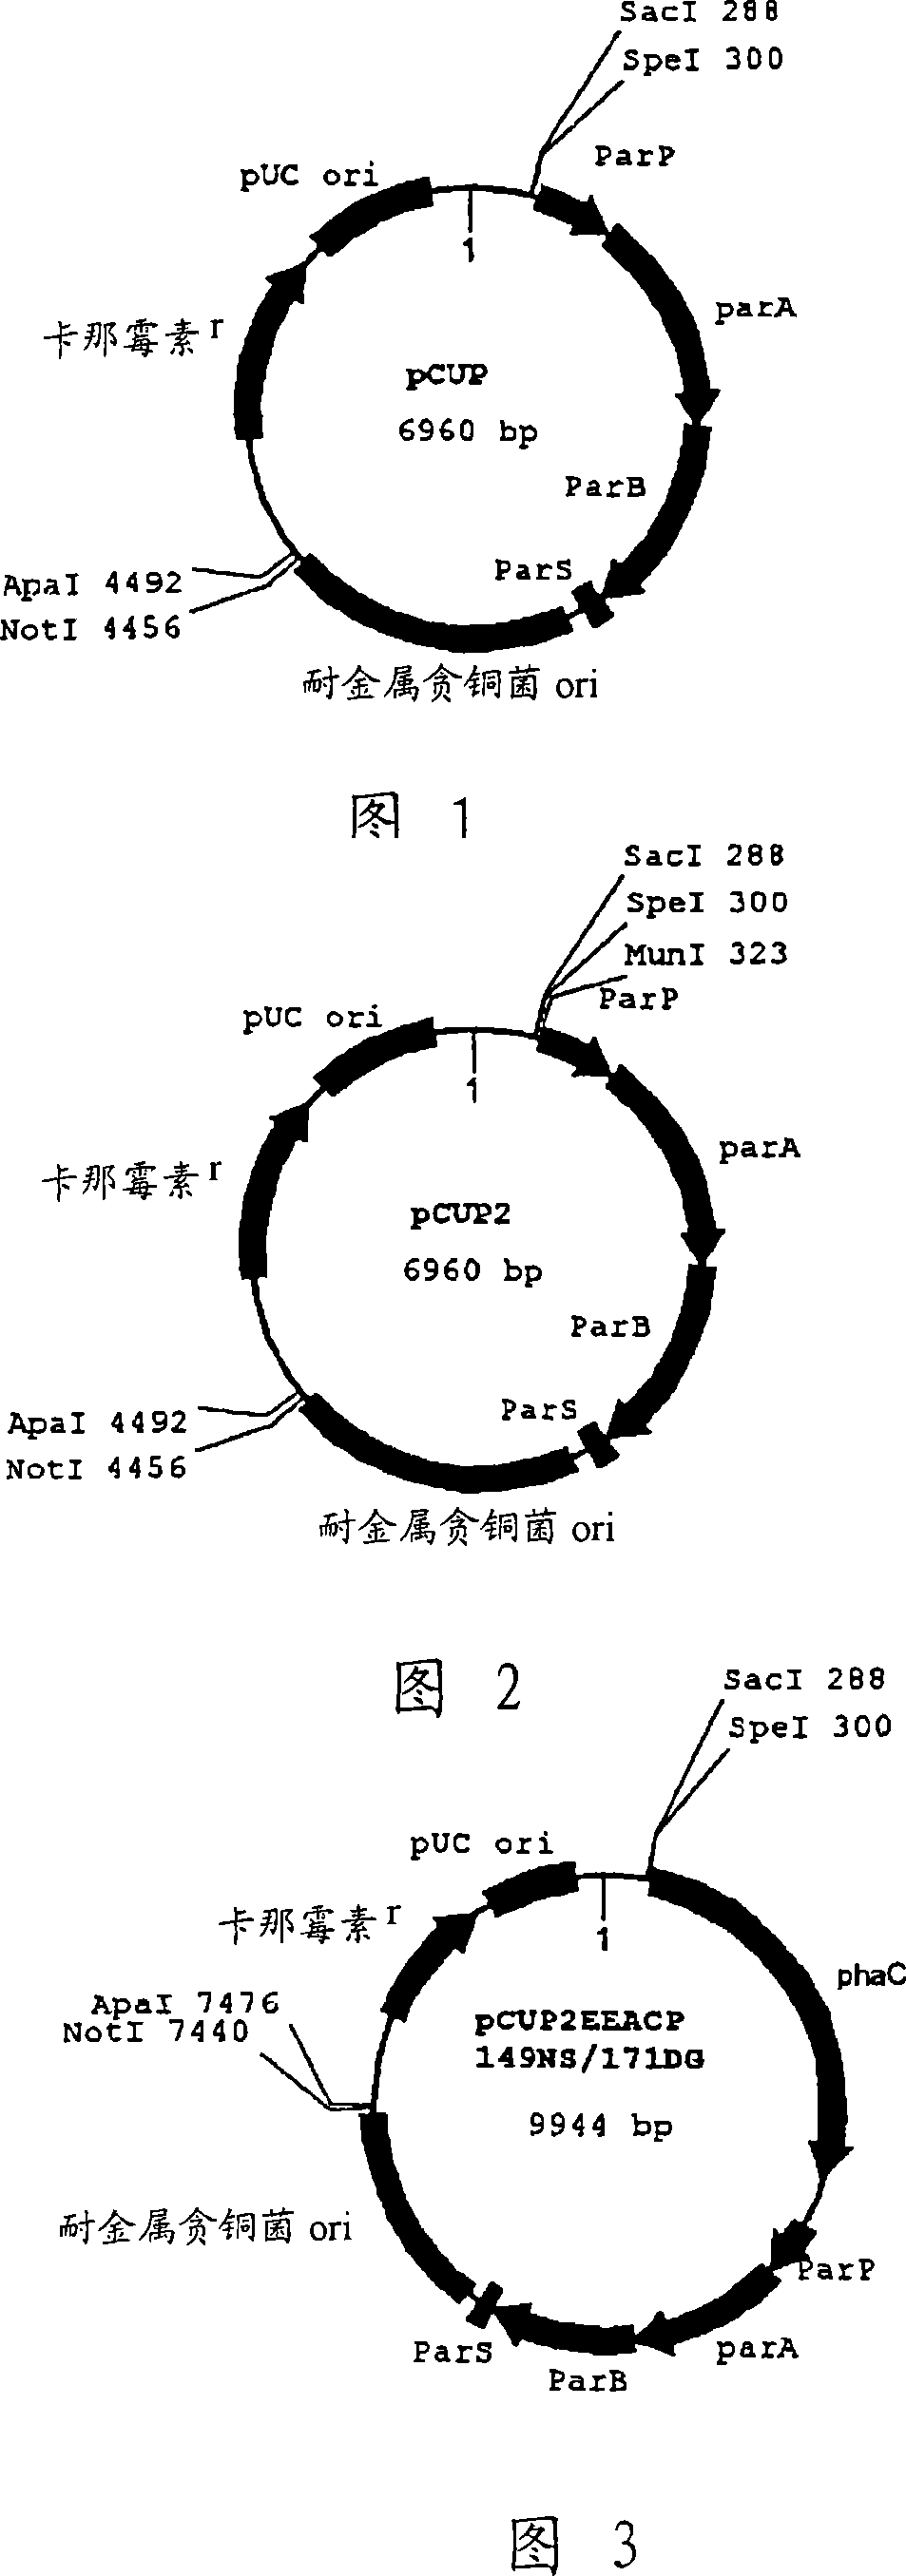 Novel plasmid vector and transformant capable of carrying plasmid stably